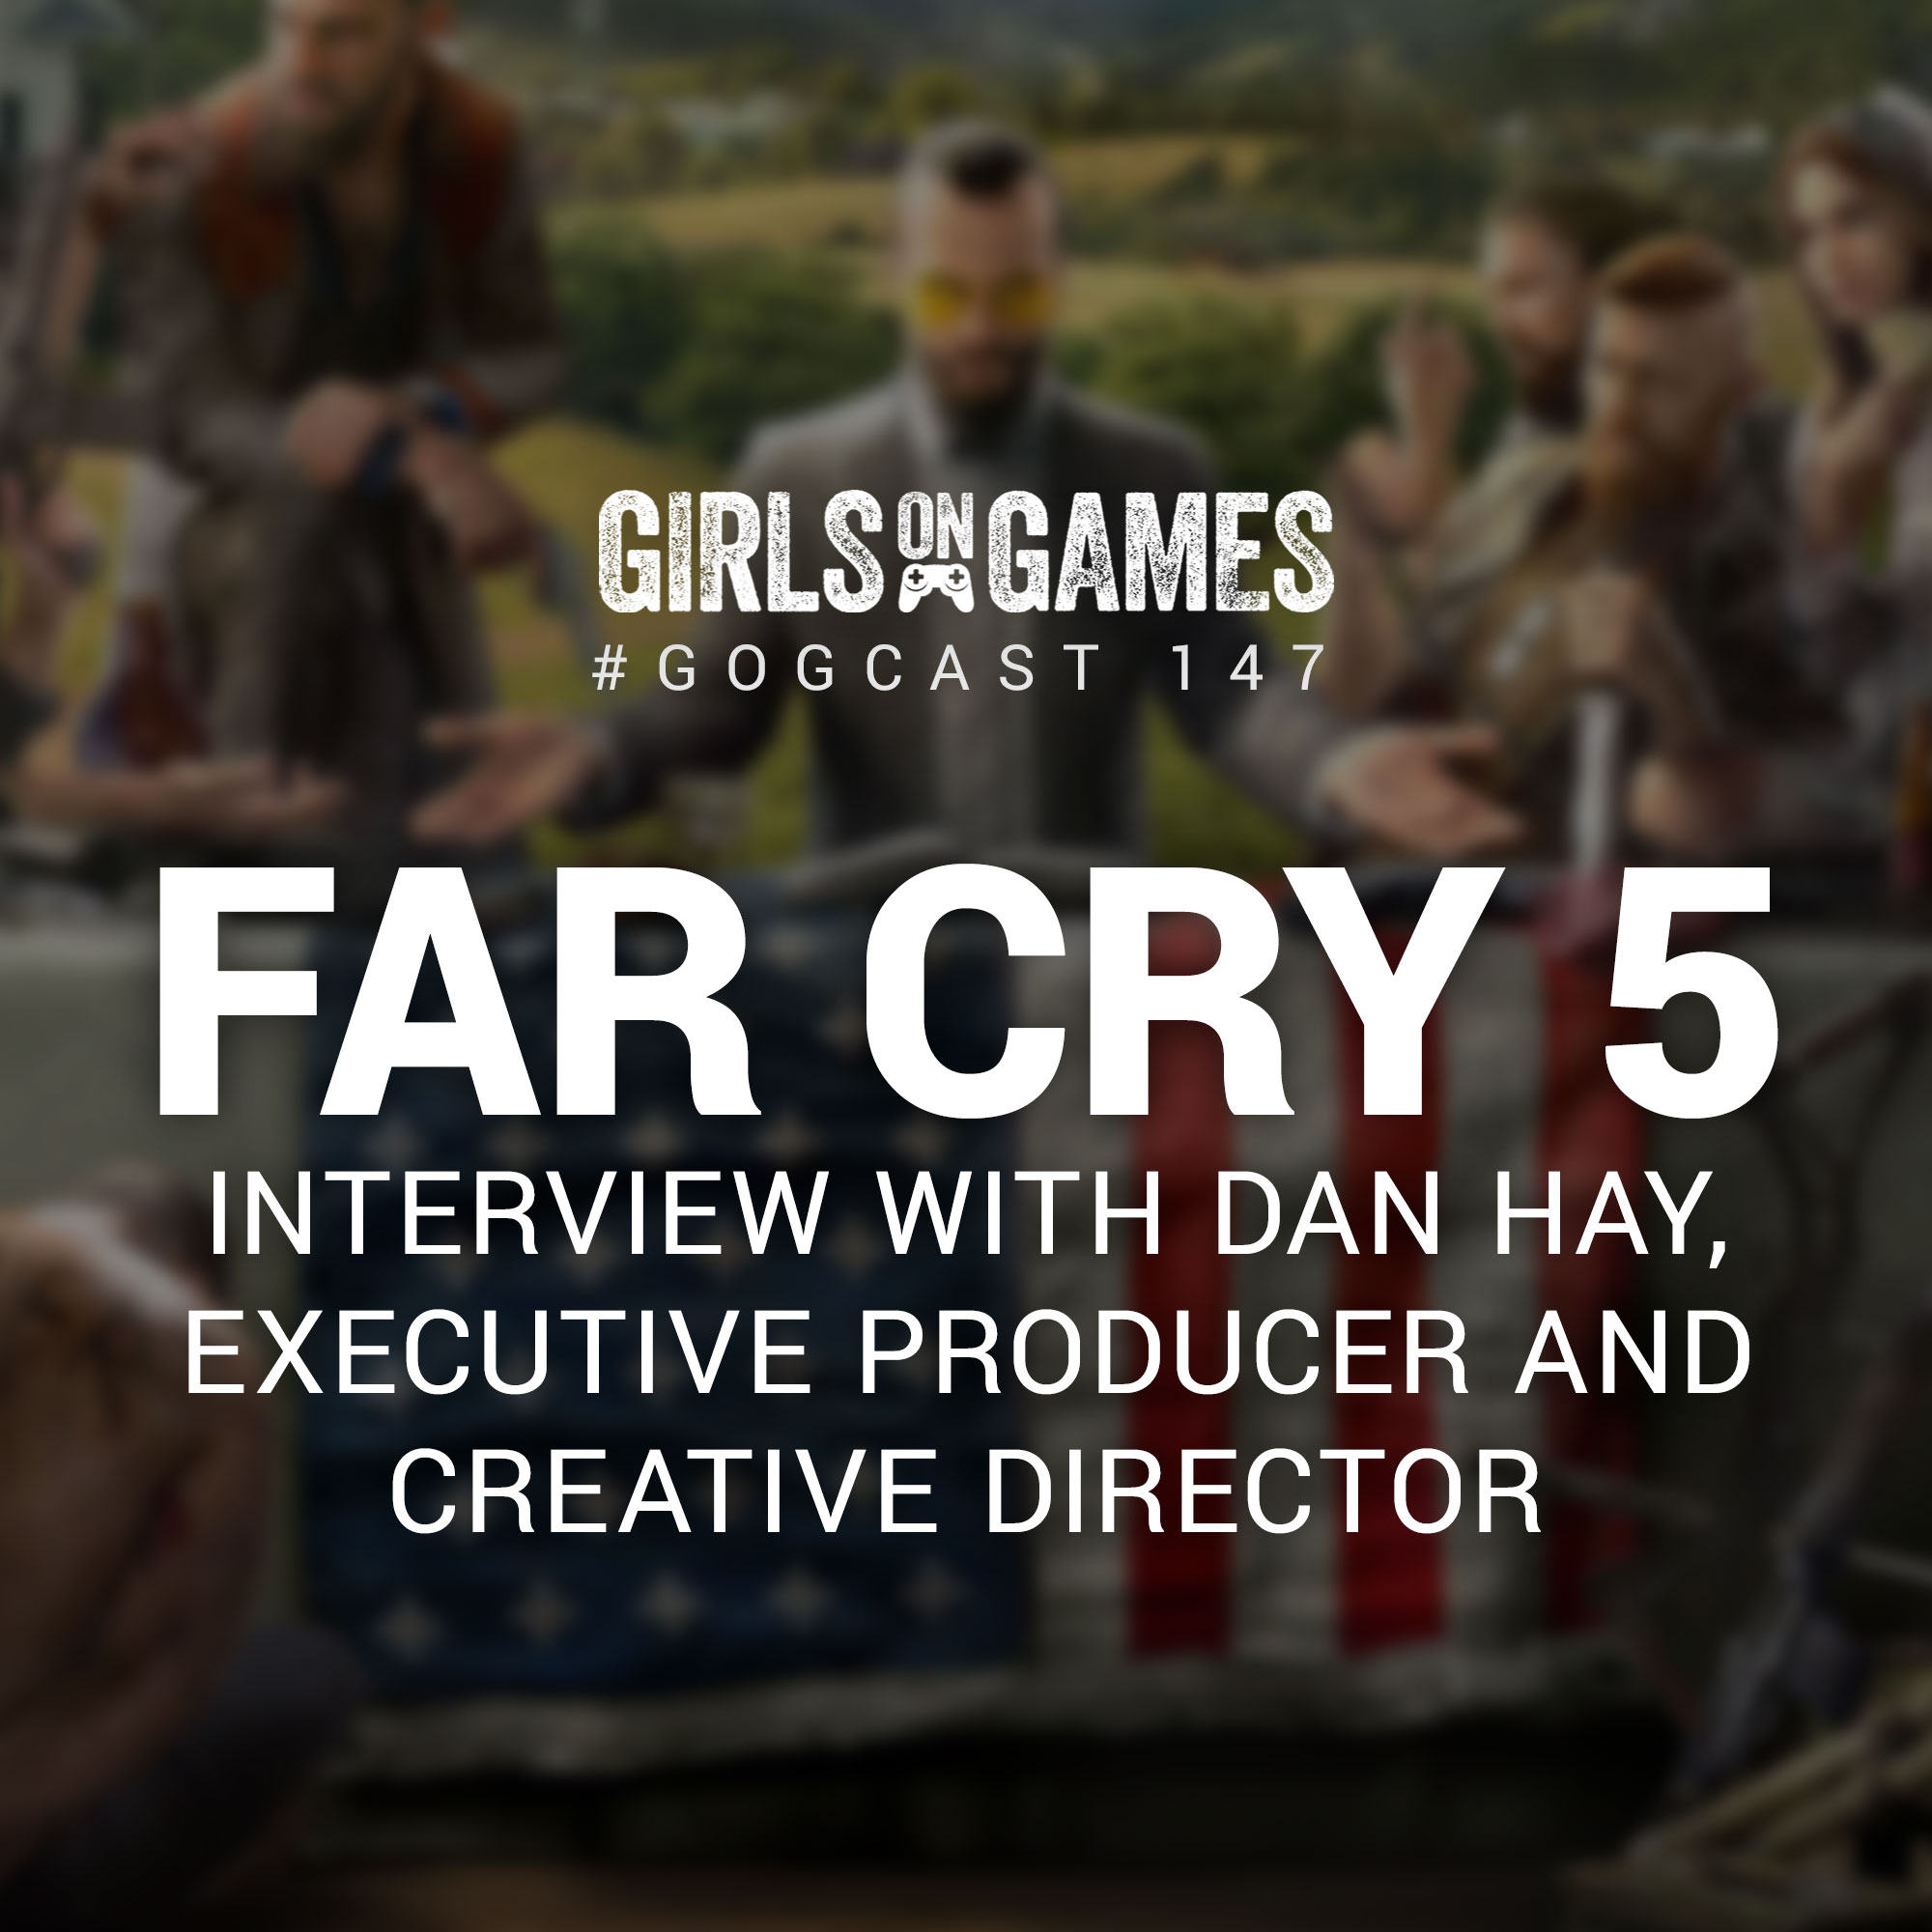 GoGCast 147: Far Cry 5 - Interview with Dan Hay